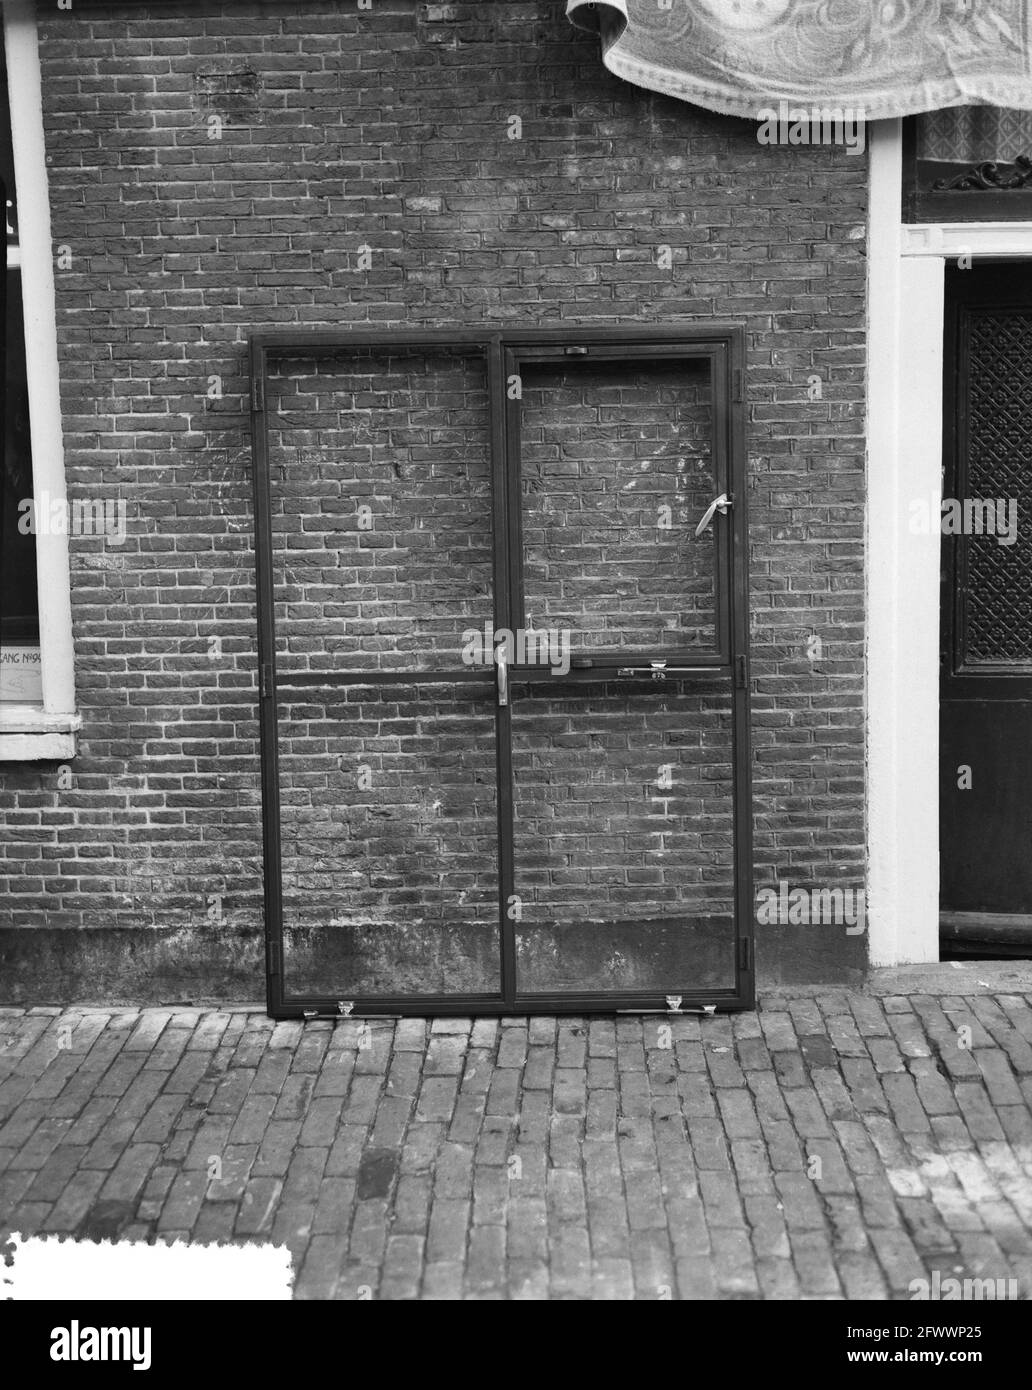 Assignment windows for Weber Amsterdam, 1 September 1955, RAMEN, assignments, The Netherlands, 20th century press agency photo, news to remember, documentary, historic photography 1945-1990, visual stories, human history of the Twentieth Century, capturing moments in time Stock Photo